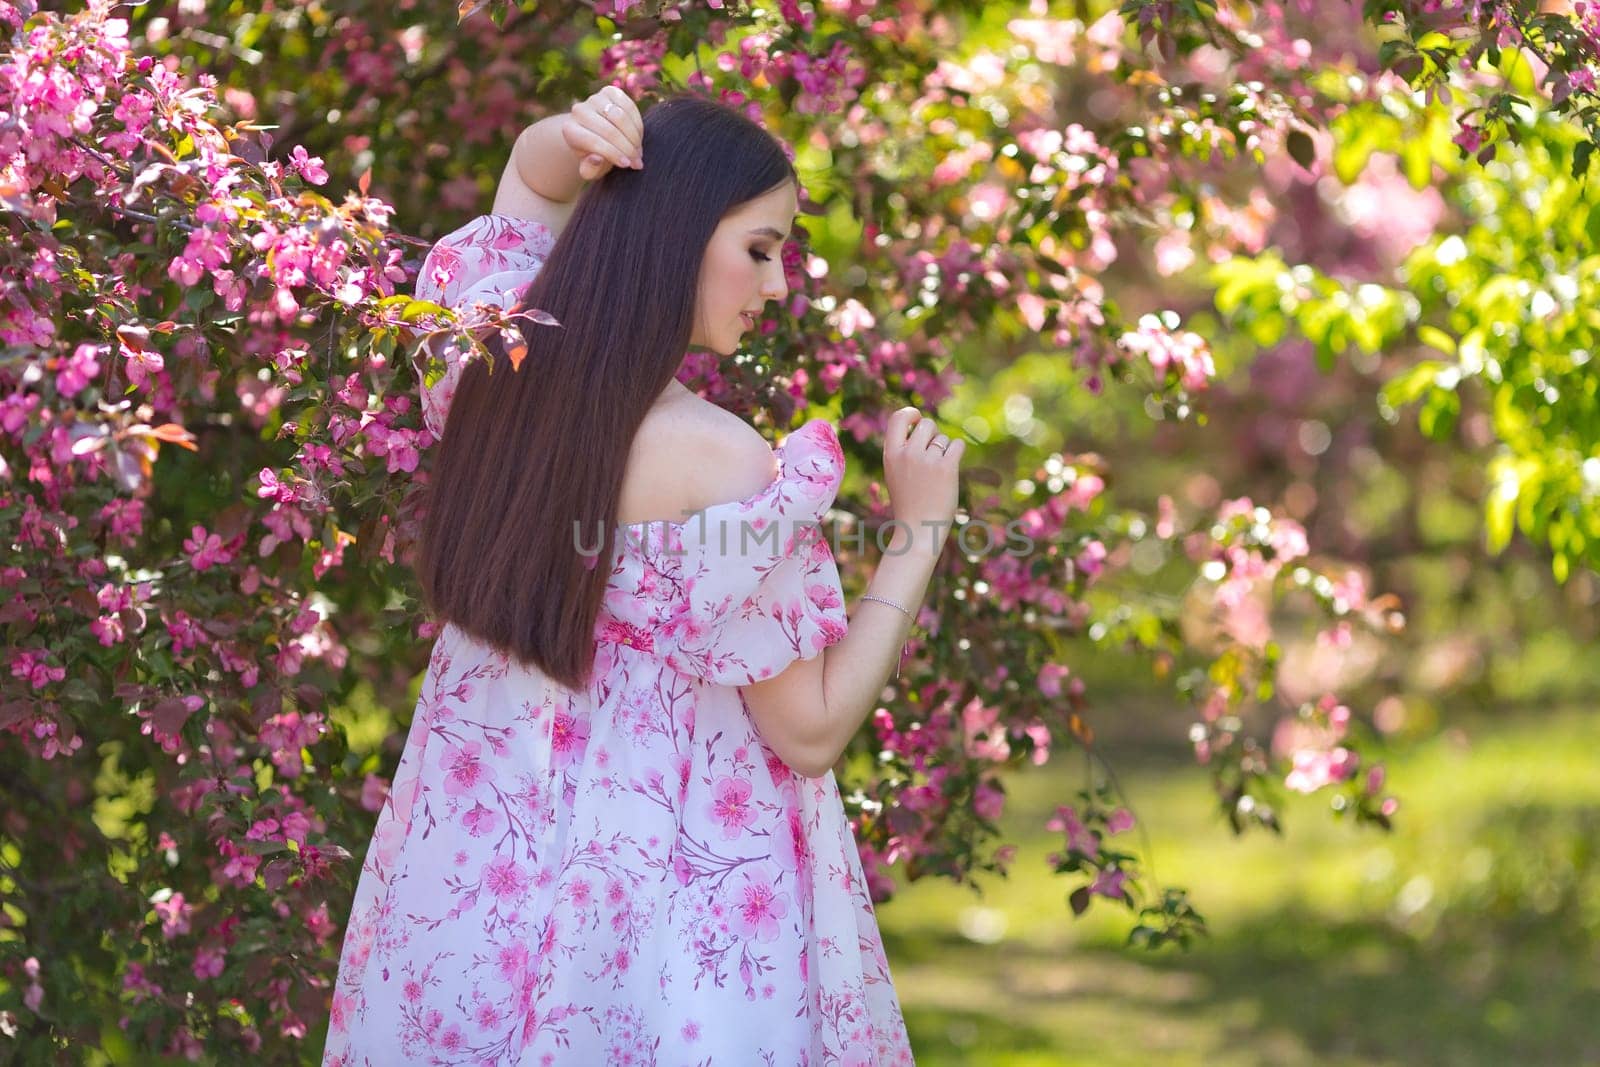 A girl with dark long hair, in a light pink dress standing near pink blooming garden. Rear view. Close up. Copy space